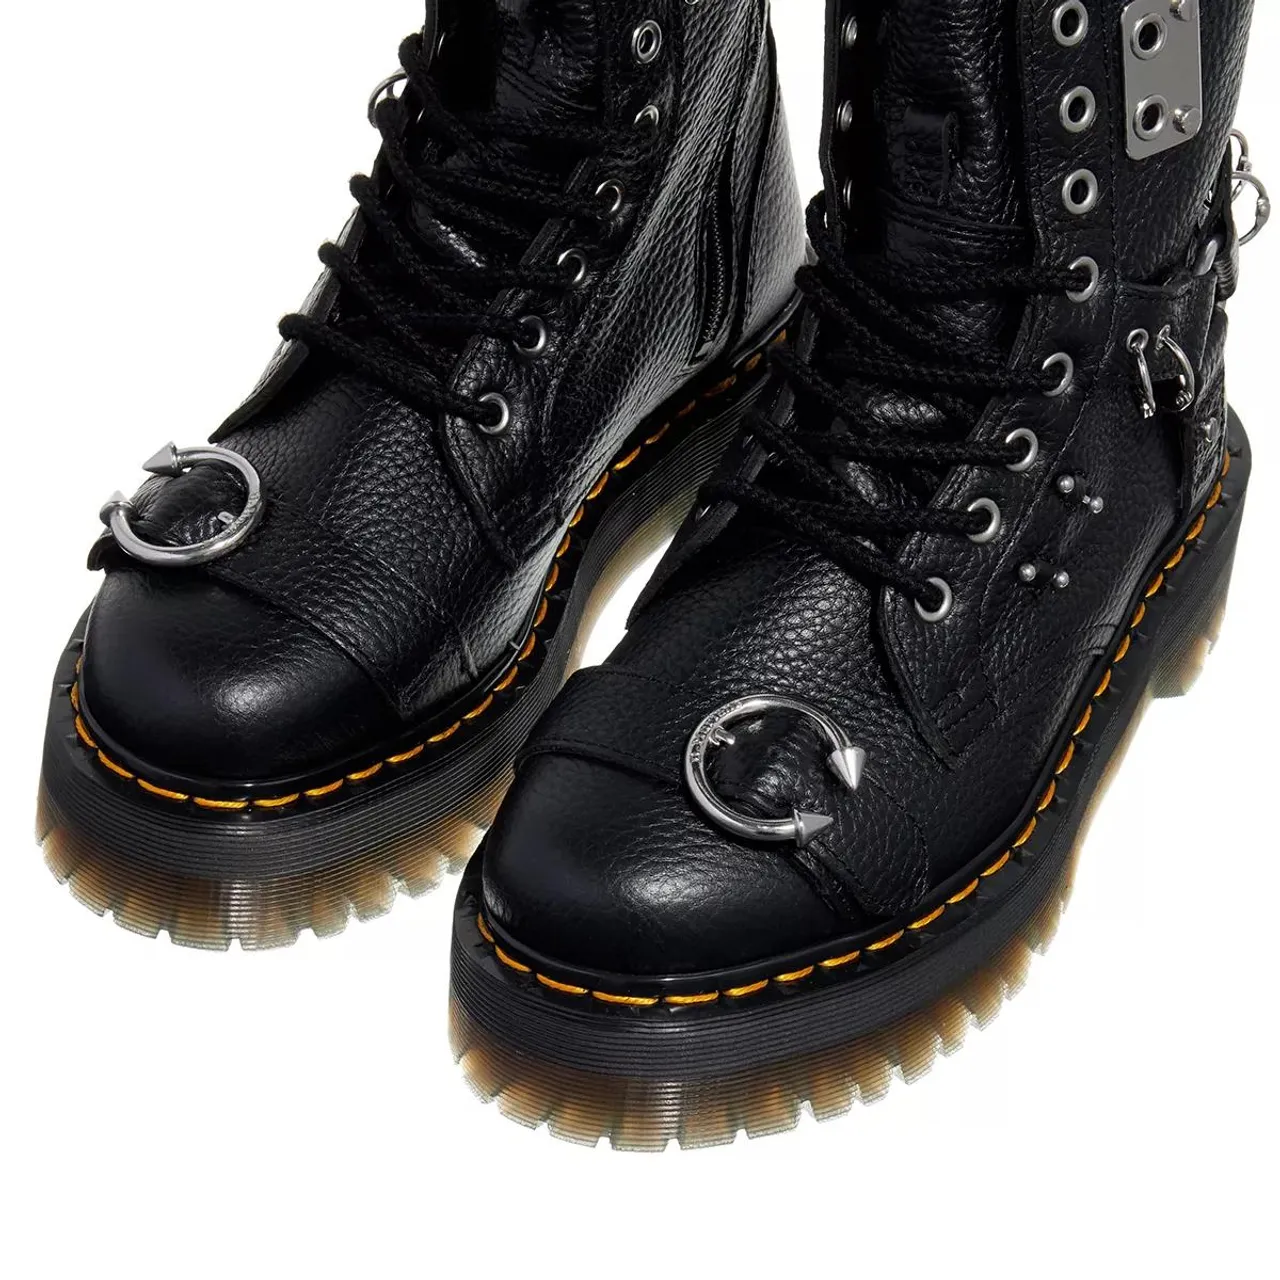 Dr. Martens Boots & Ankle Boots - 8 Eye Boot - black - Boots & Ankle Boots for ladies